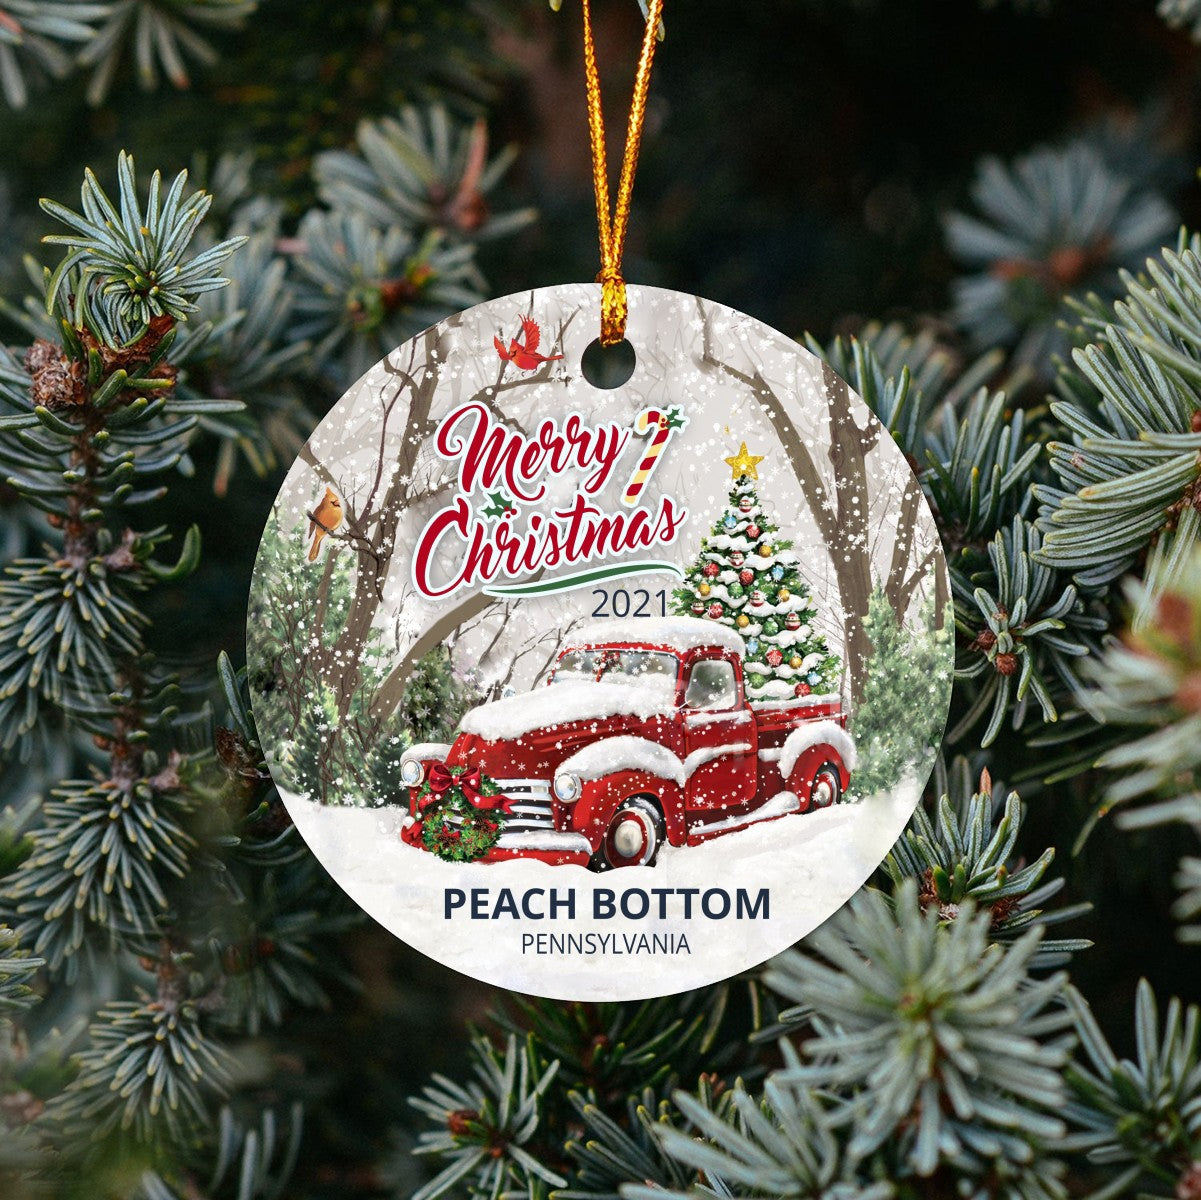 Christmas Tree Ornaments Peach Bottom - Ornament With Name City, State Peach Bottom Pennsylvania PA Ornament - Red Truck Xmas Ornaments 3'' Plastic Gift For Family, Friend And Housewarming